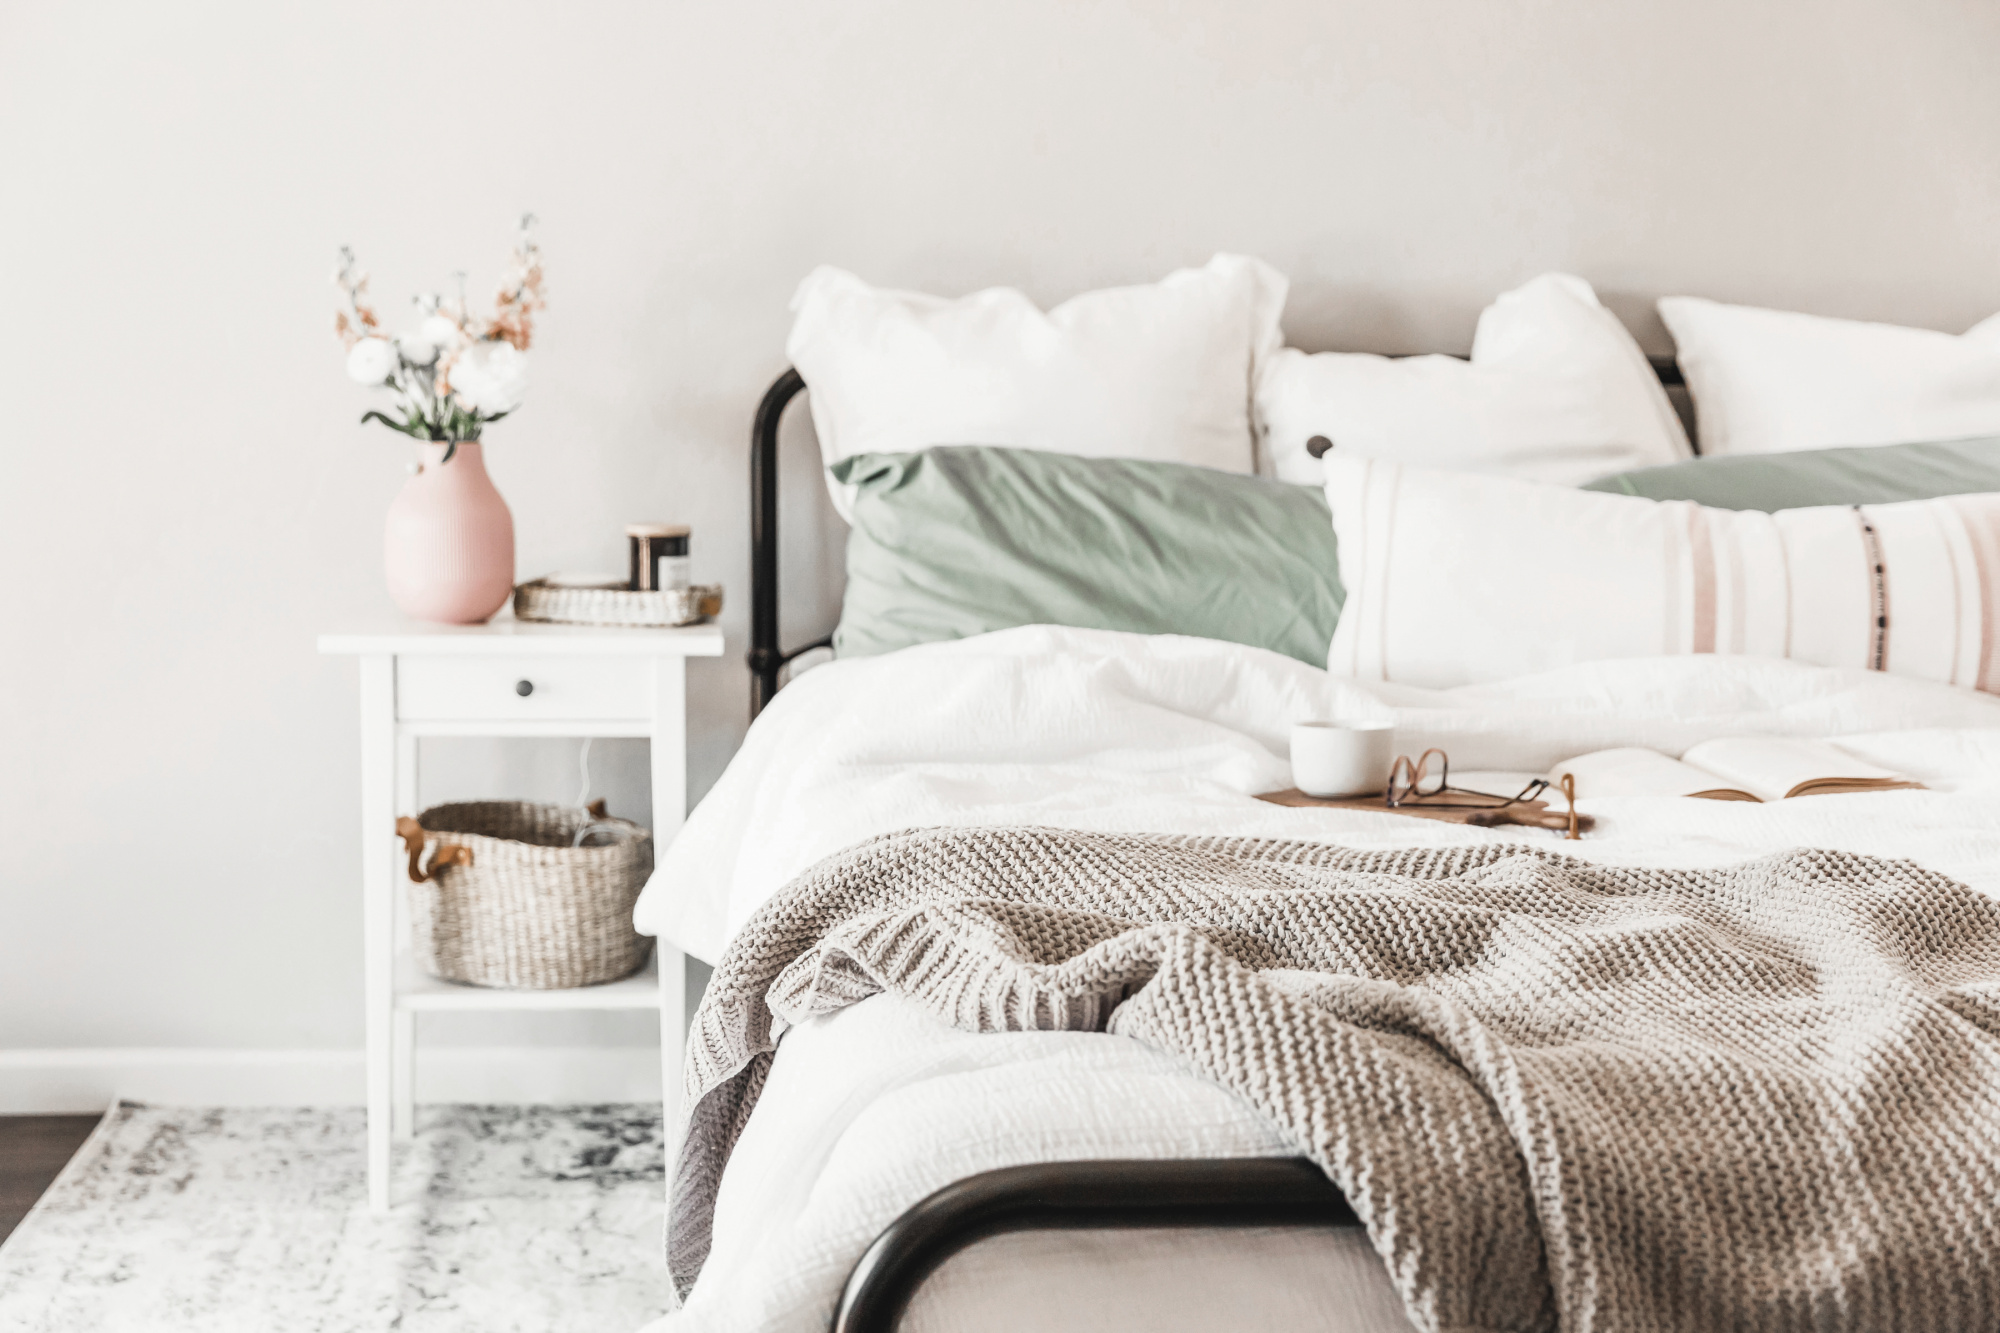 How To Make Your Master Bedroom The Retreat You’ve Always Wanted! comfy cozy bedding, master bedroom sanctuary, luxe bedding